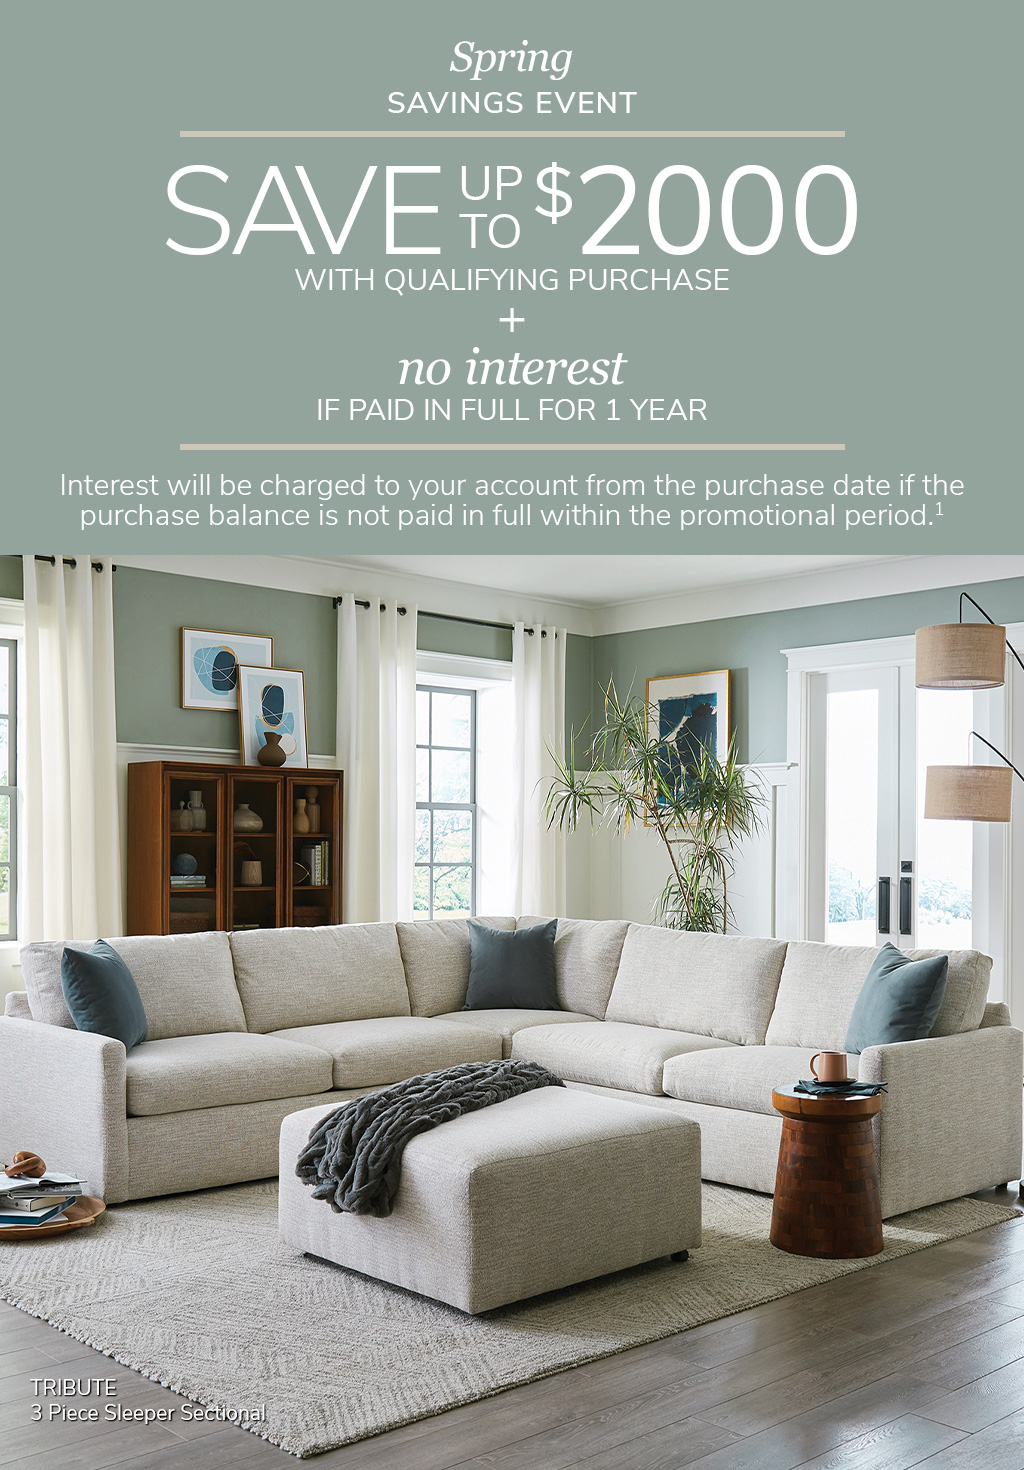 Save up to $2000 + no interest if paid in full for 1 year